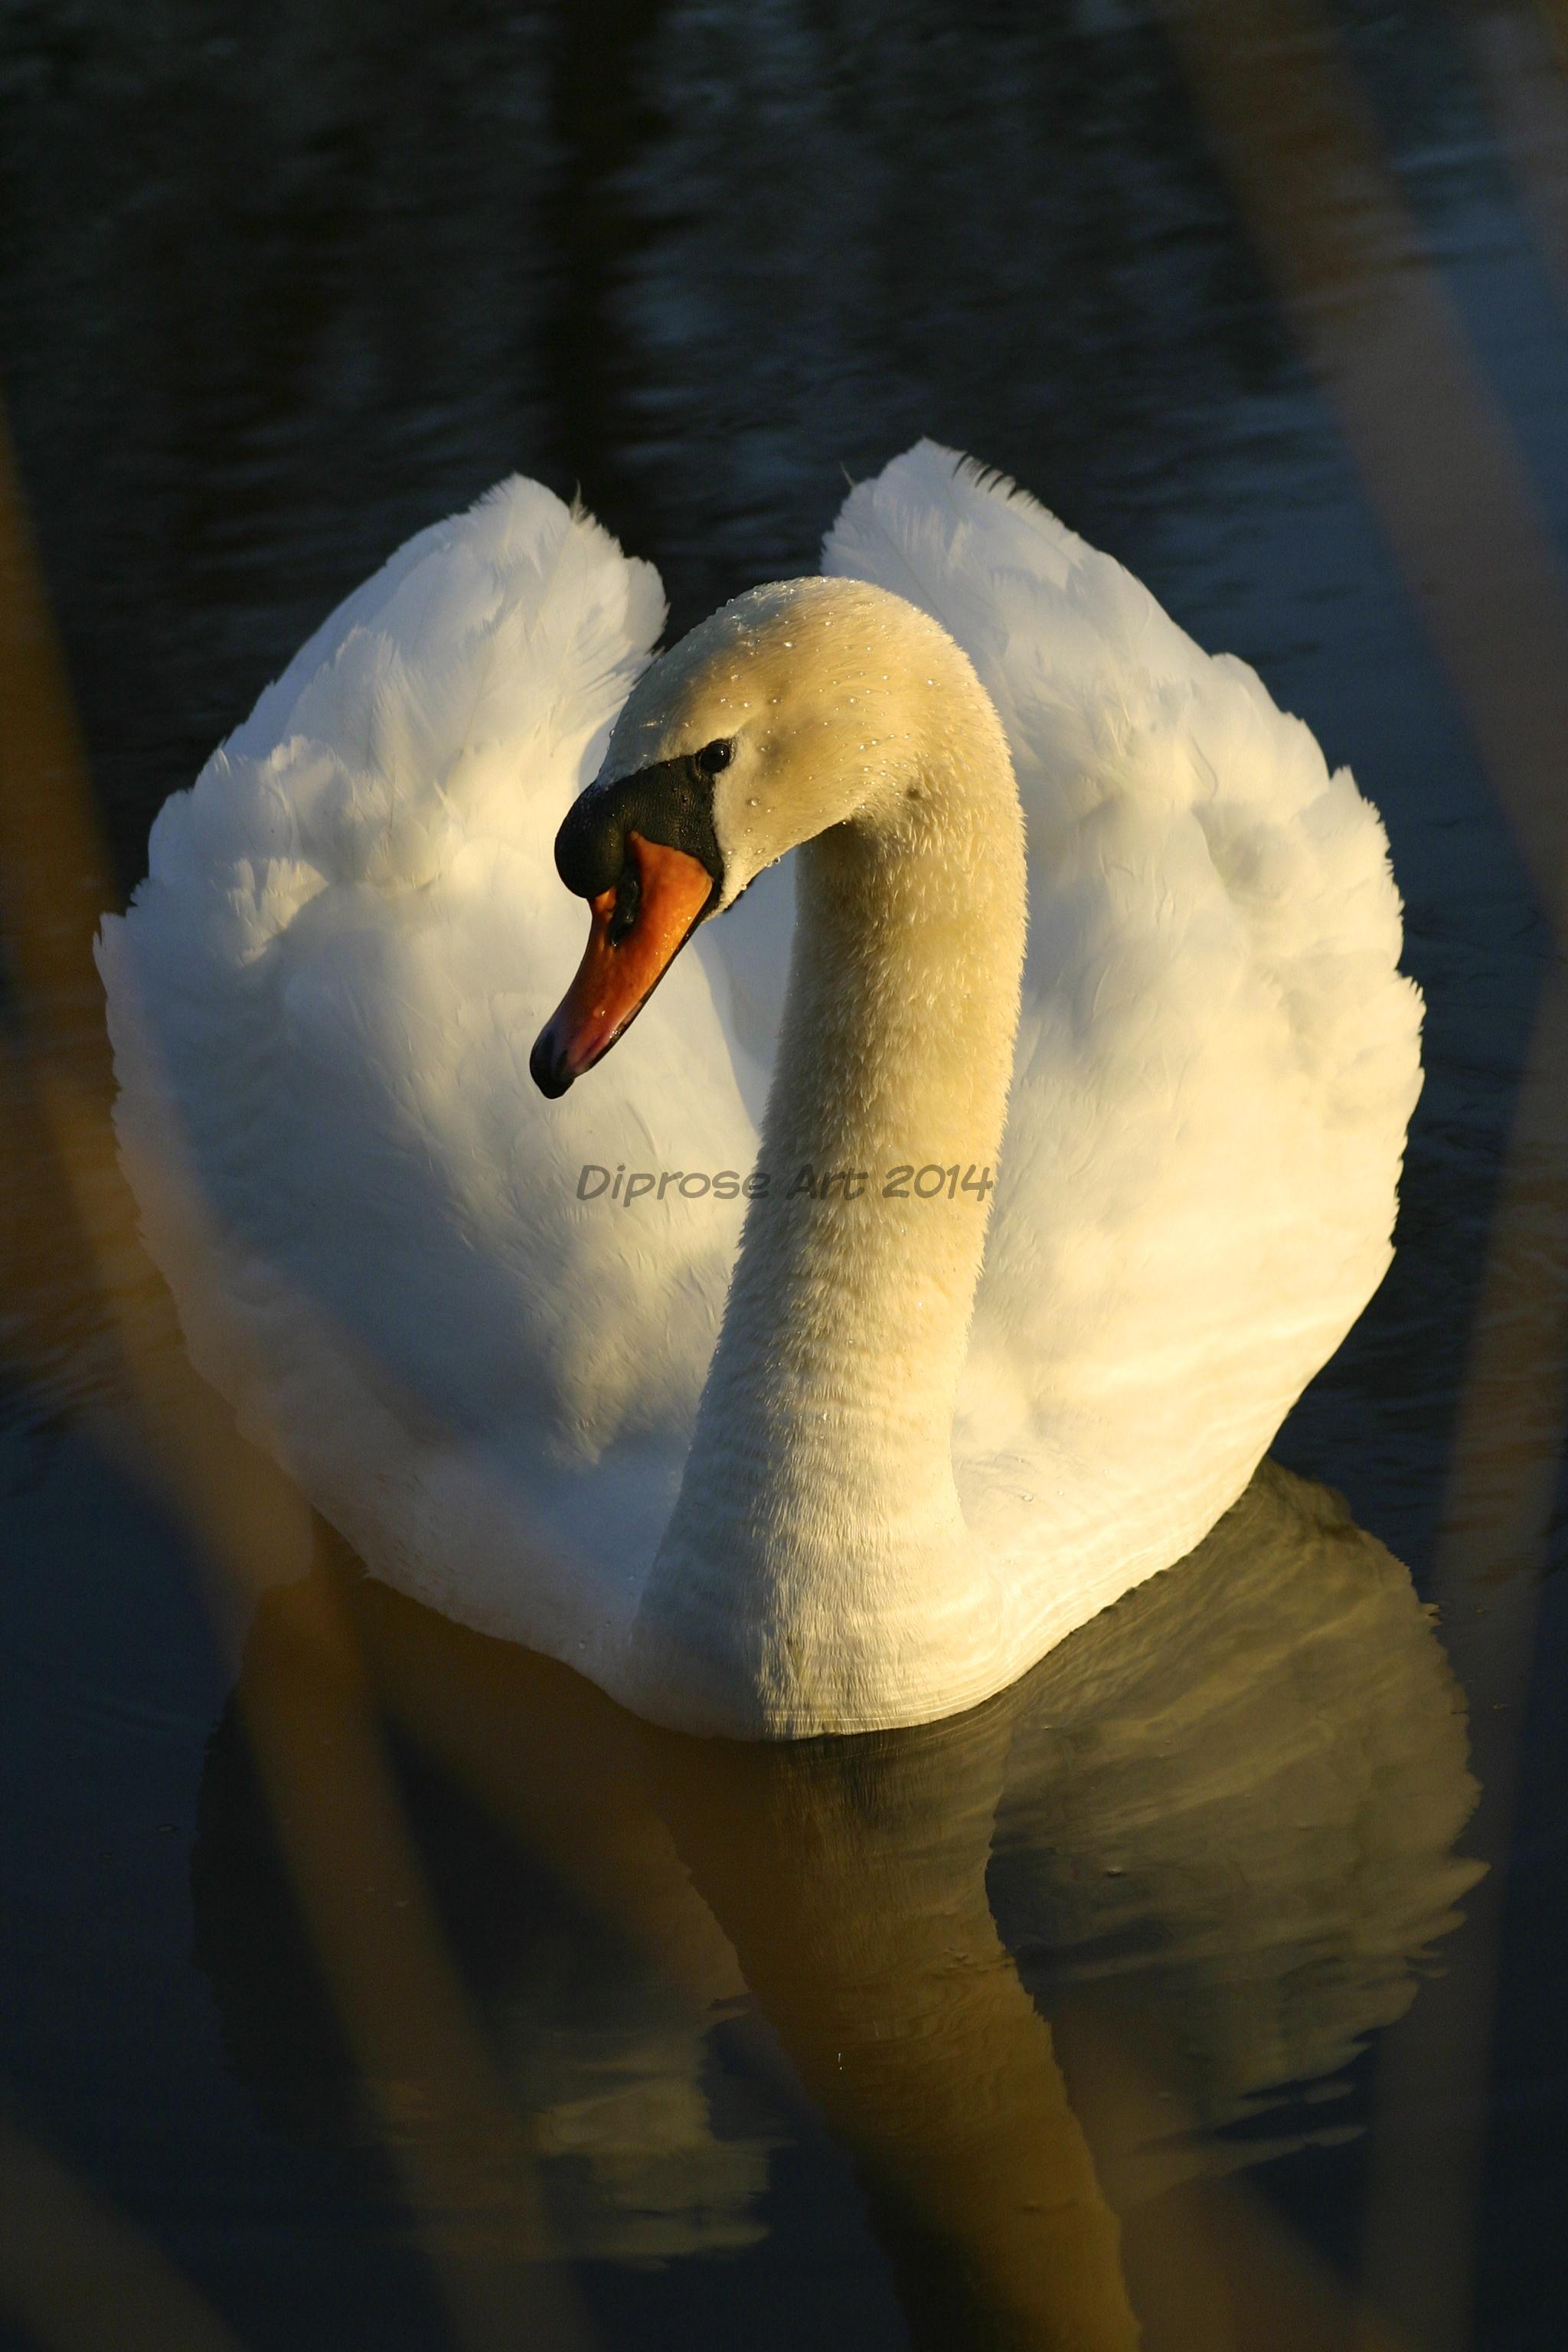 another view of the mute swan who was giving me quite a display